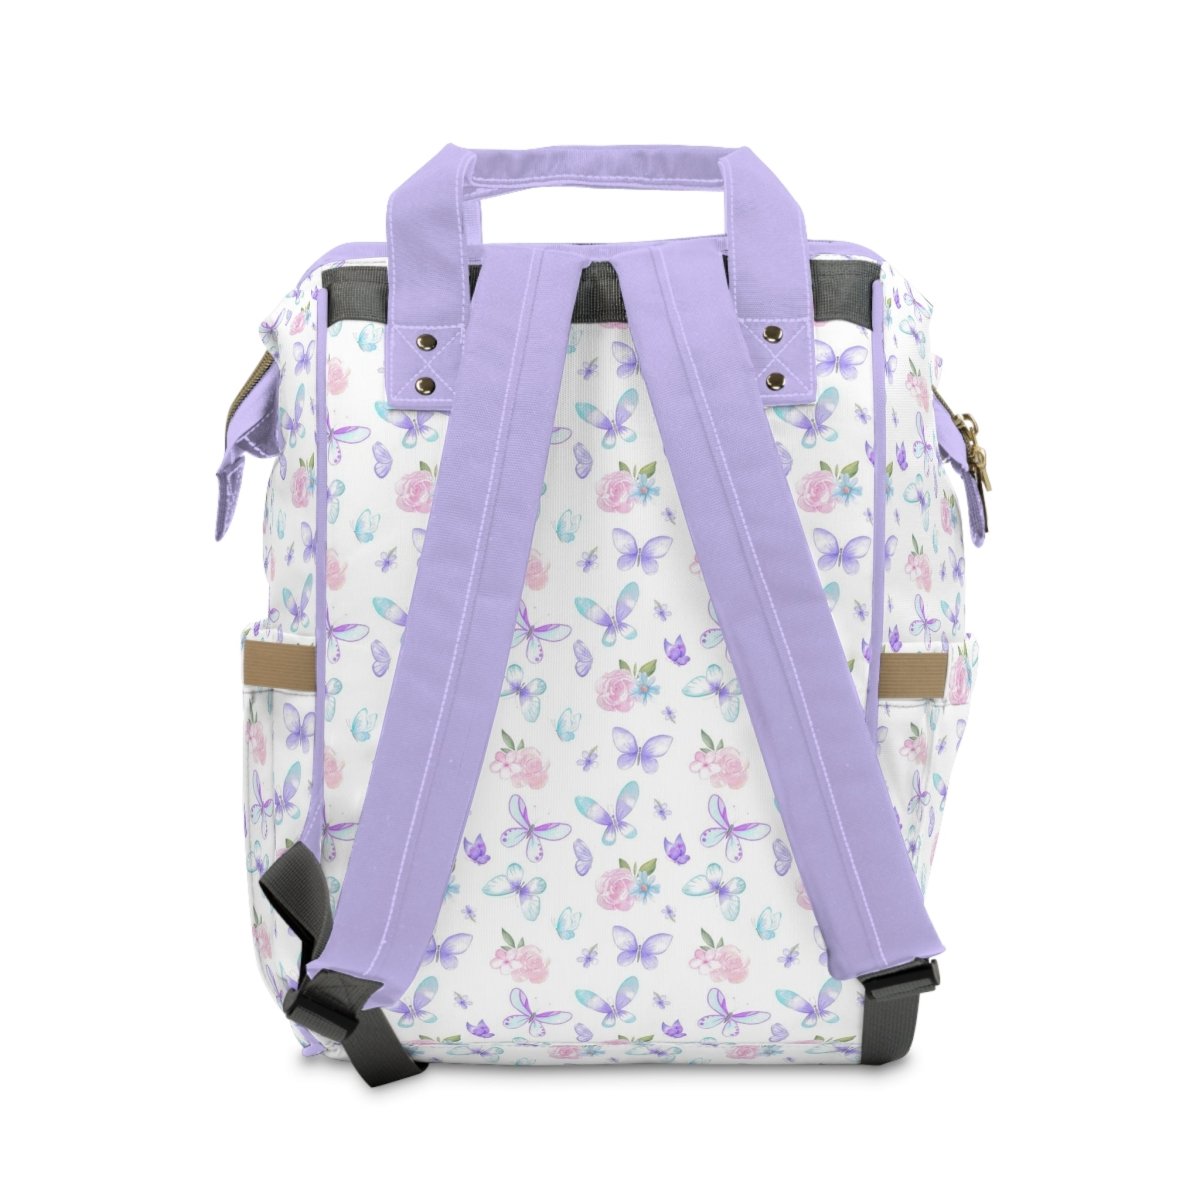 Butterfly Floral Personalized Backpack Diaper Bag - Butterfly Floral, gender_girl, text